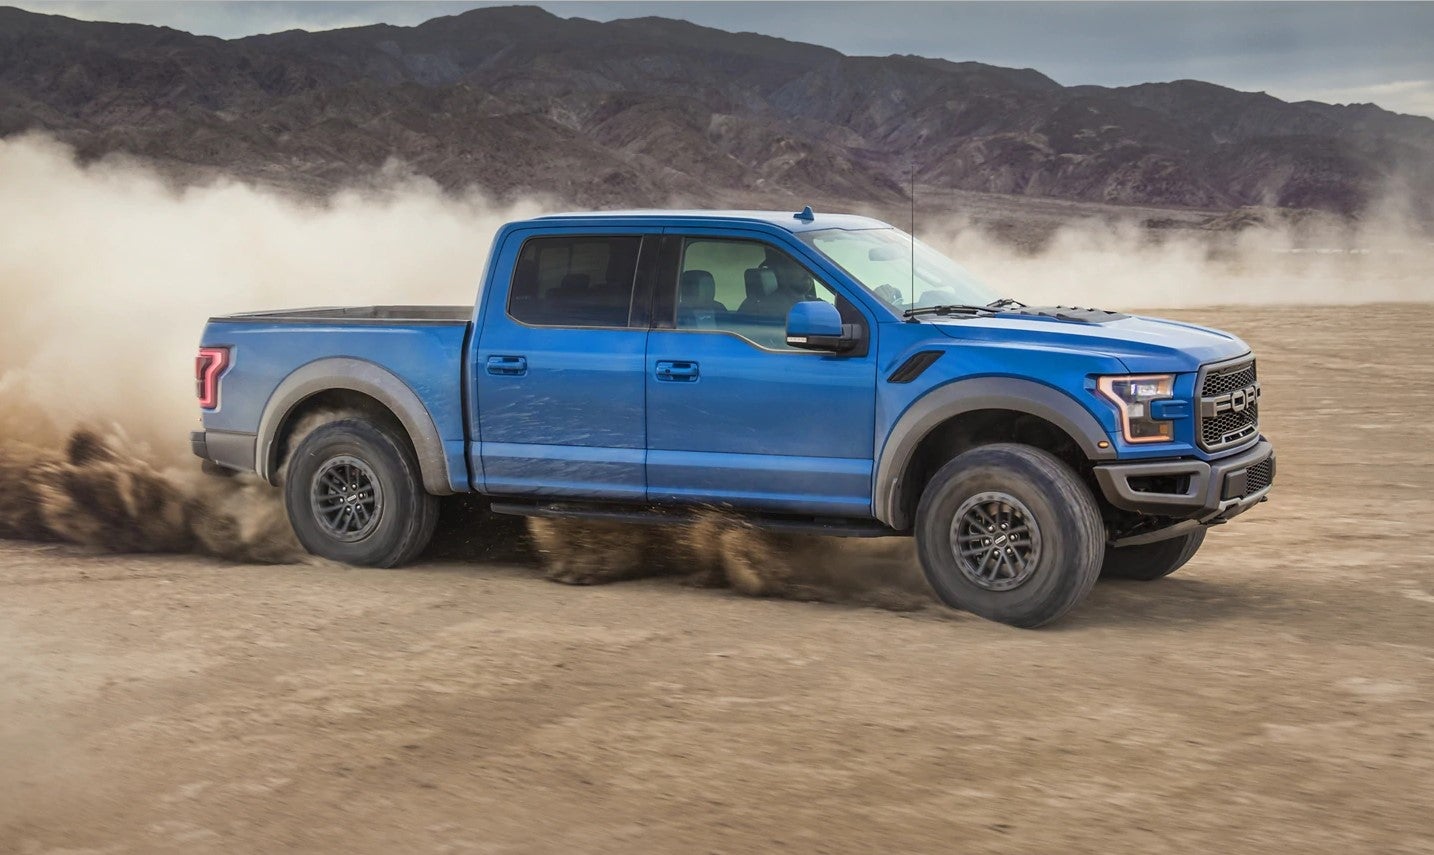 2021 Ford F-150 Raptor teased ahead of debut in February